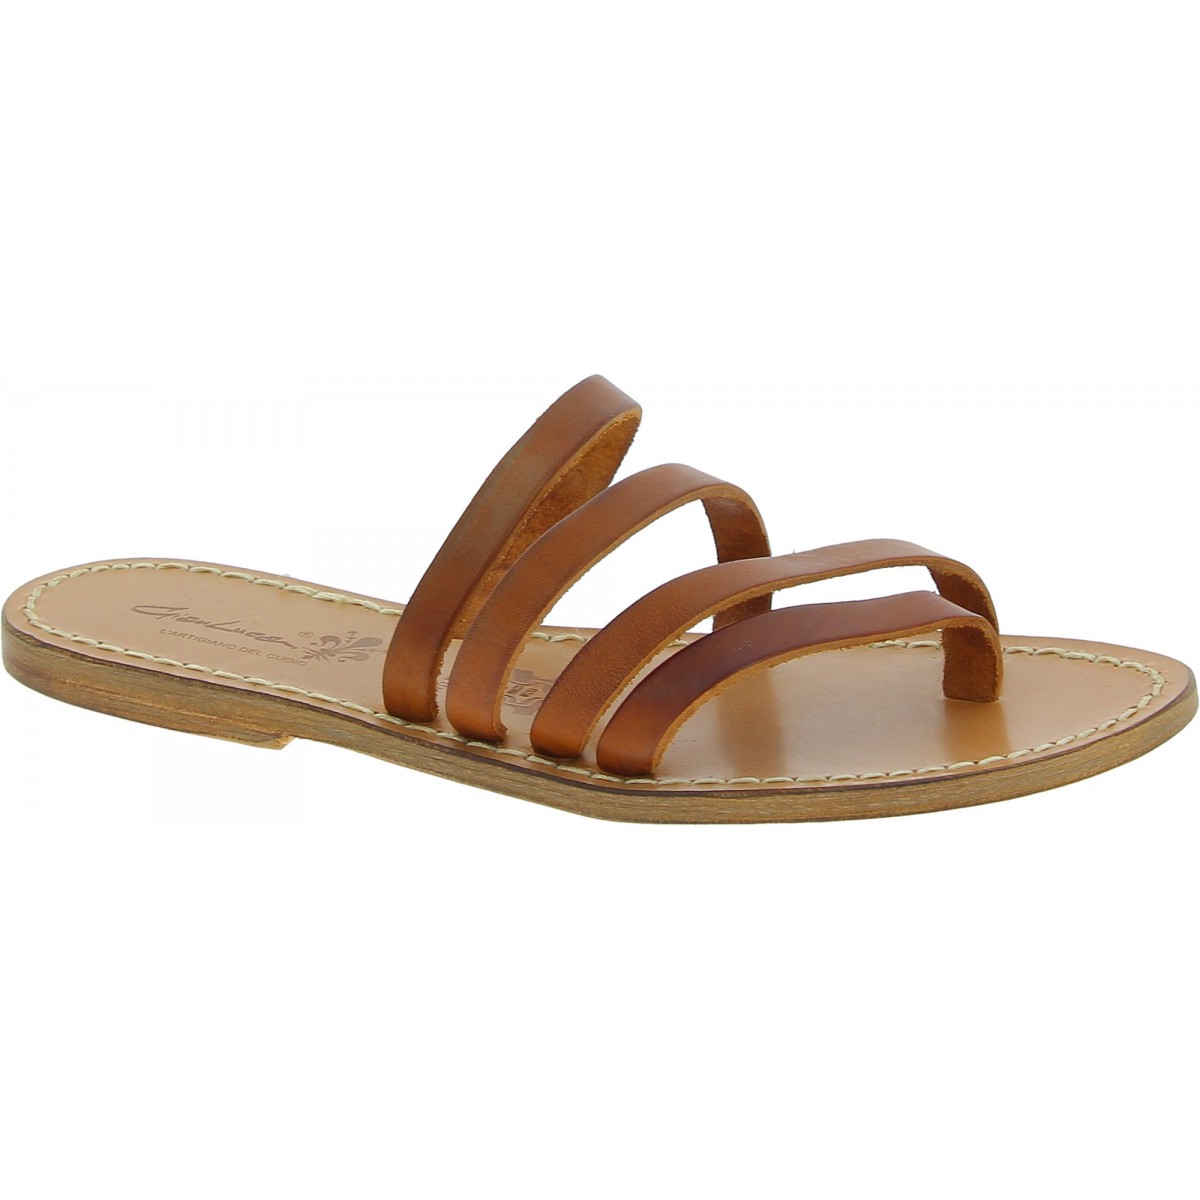 Handmade tan leather flip flop sandals for women | The leather craftsmen